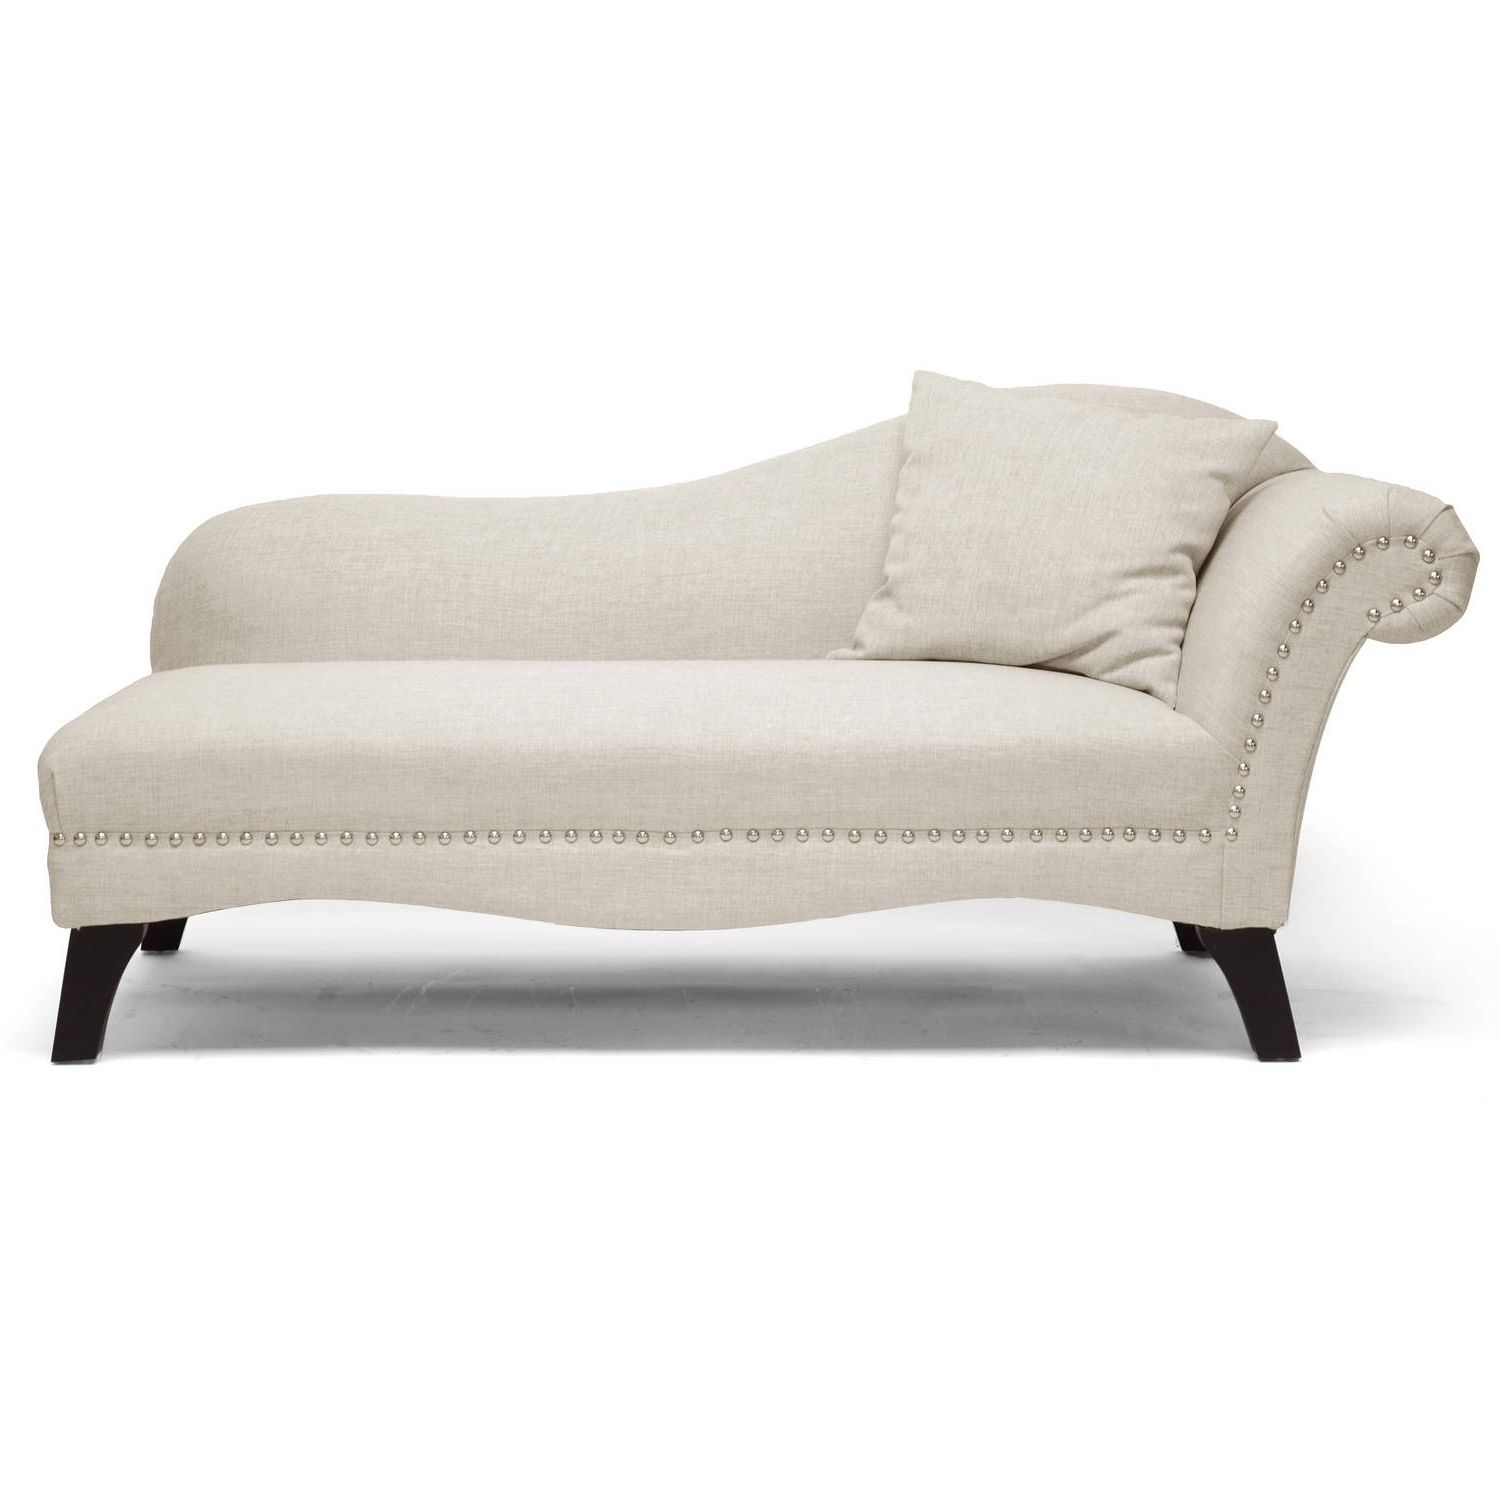 2017 Sofa Chaise Lounges For Chaise Lounges – Walmart (Photo 2 of 15)